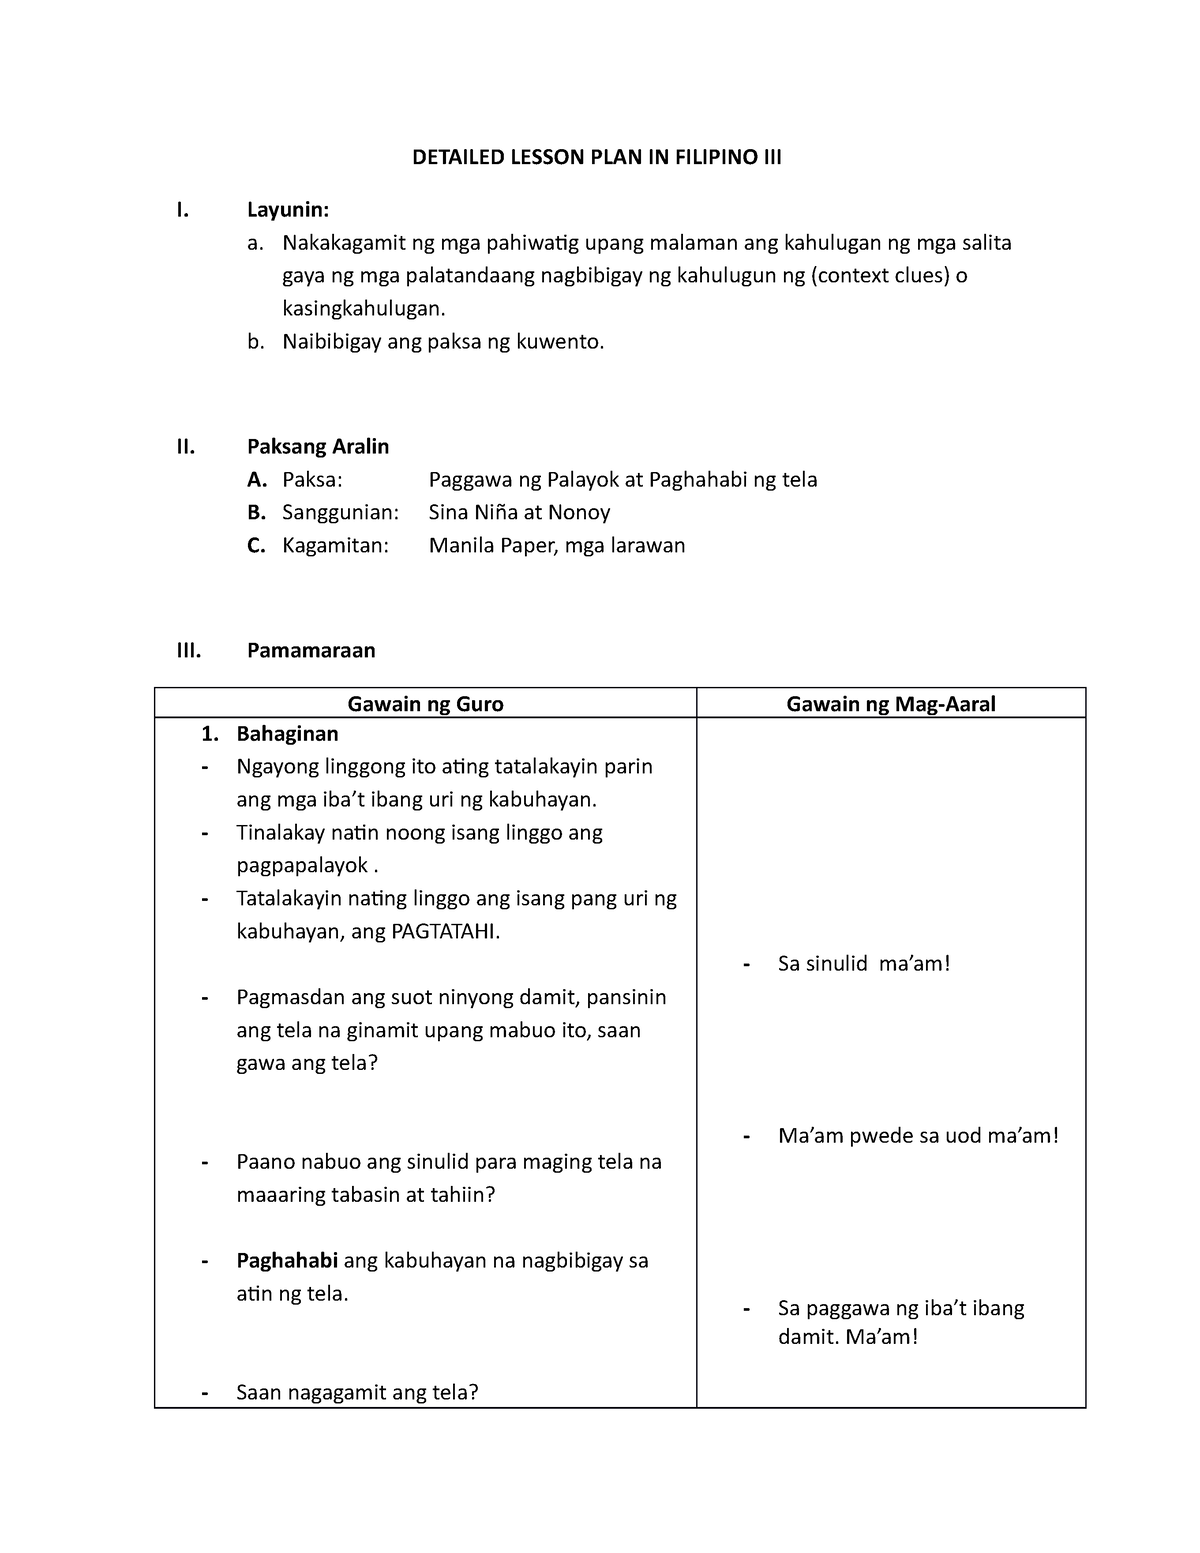 Detailed Lesson PLAN IN Filipino III - DETAILED LESSON PLAN IN FILIPINO